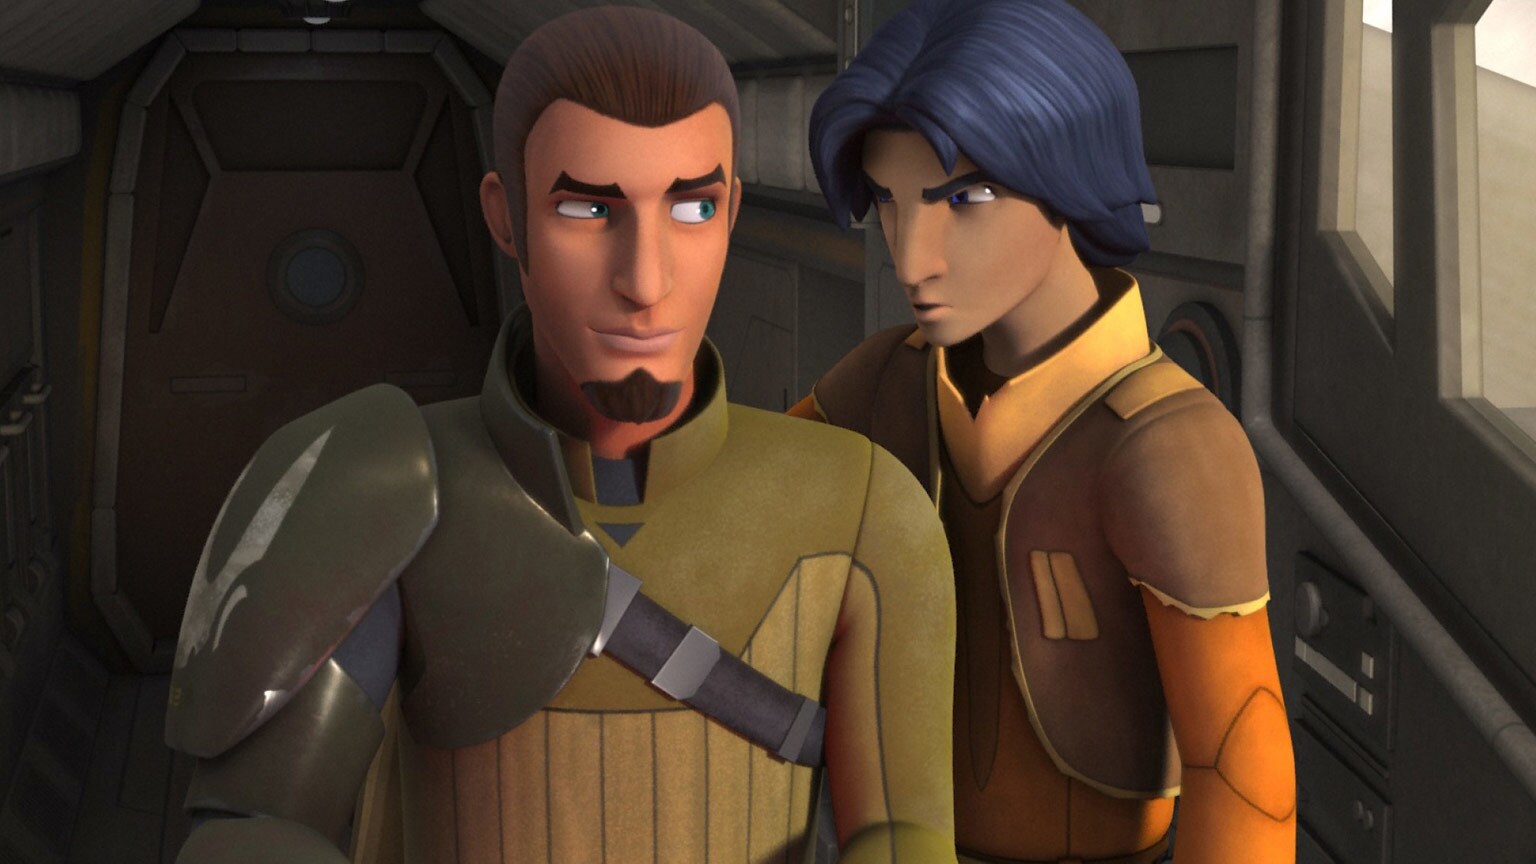 How the Father-Son Dynamic Between Kanan and Ezra Speaks to the Complexities of Parenting